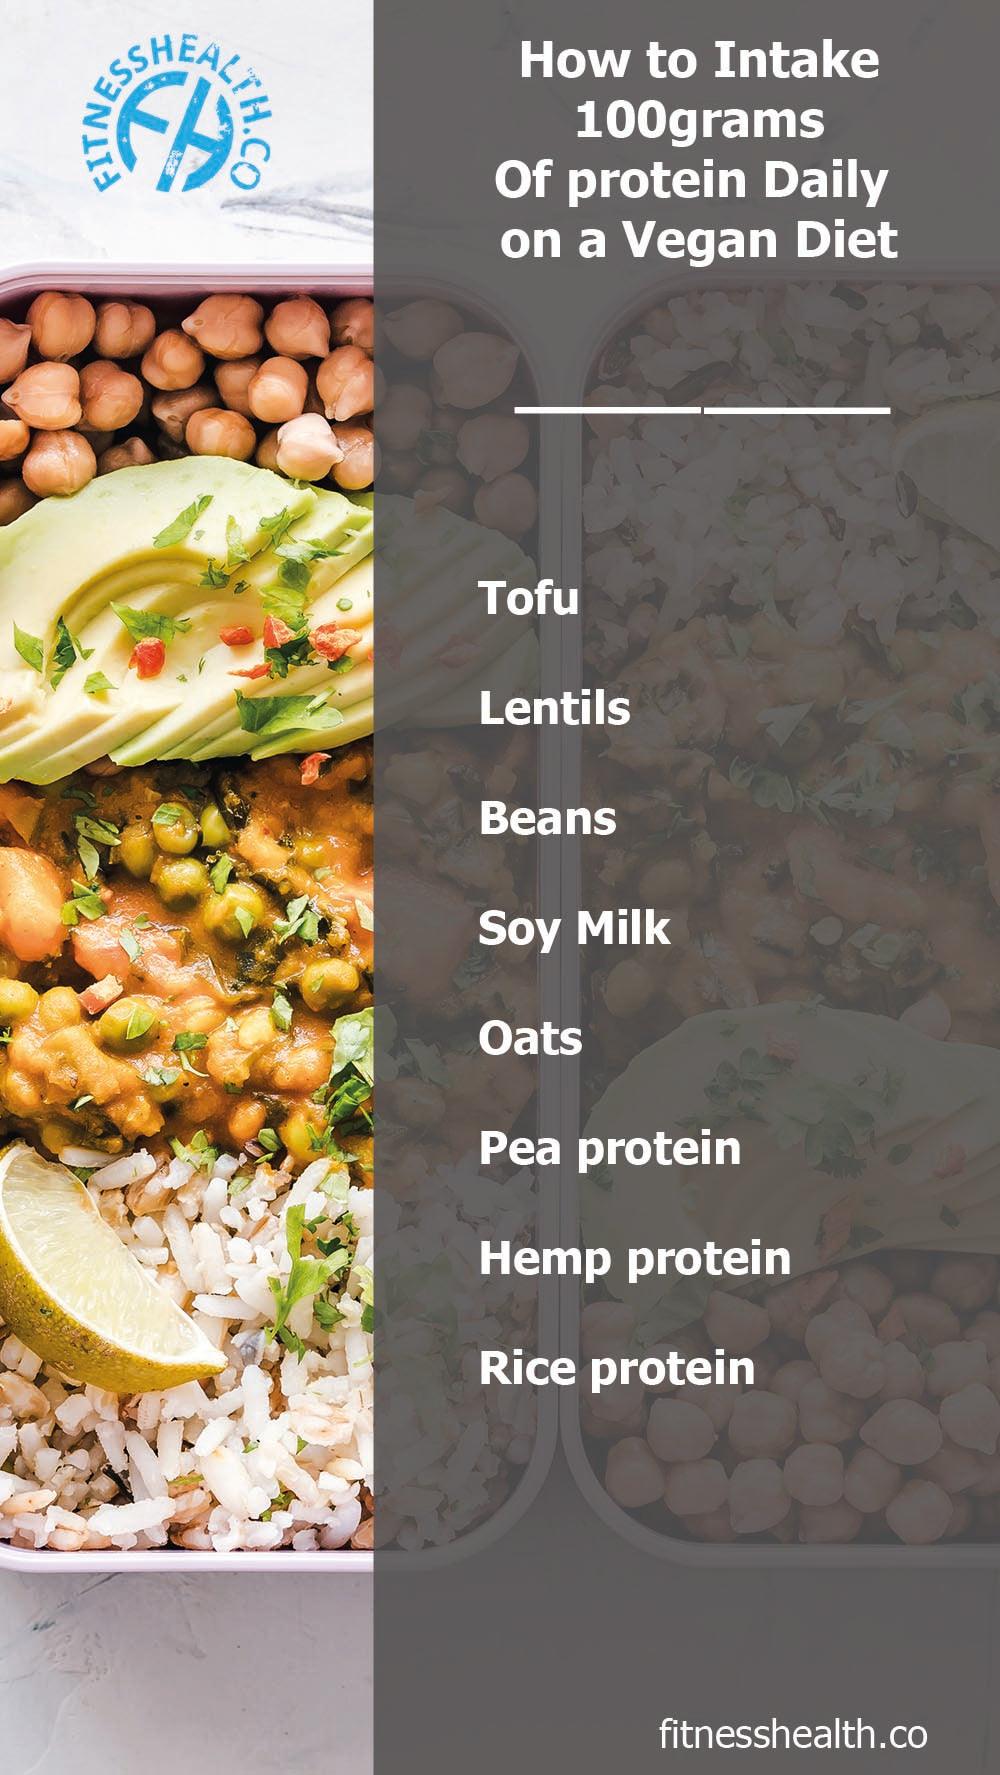 How to Intake 100grams Of Protein Daily on a Vegan Diet